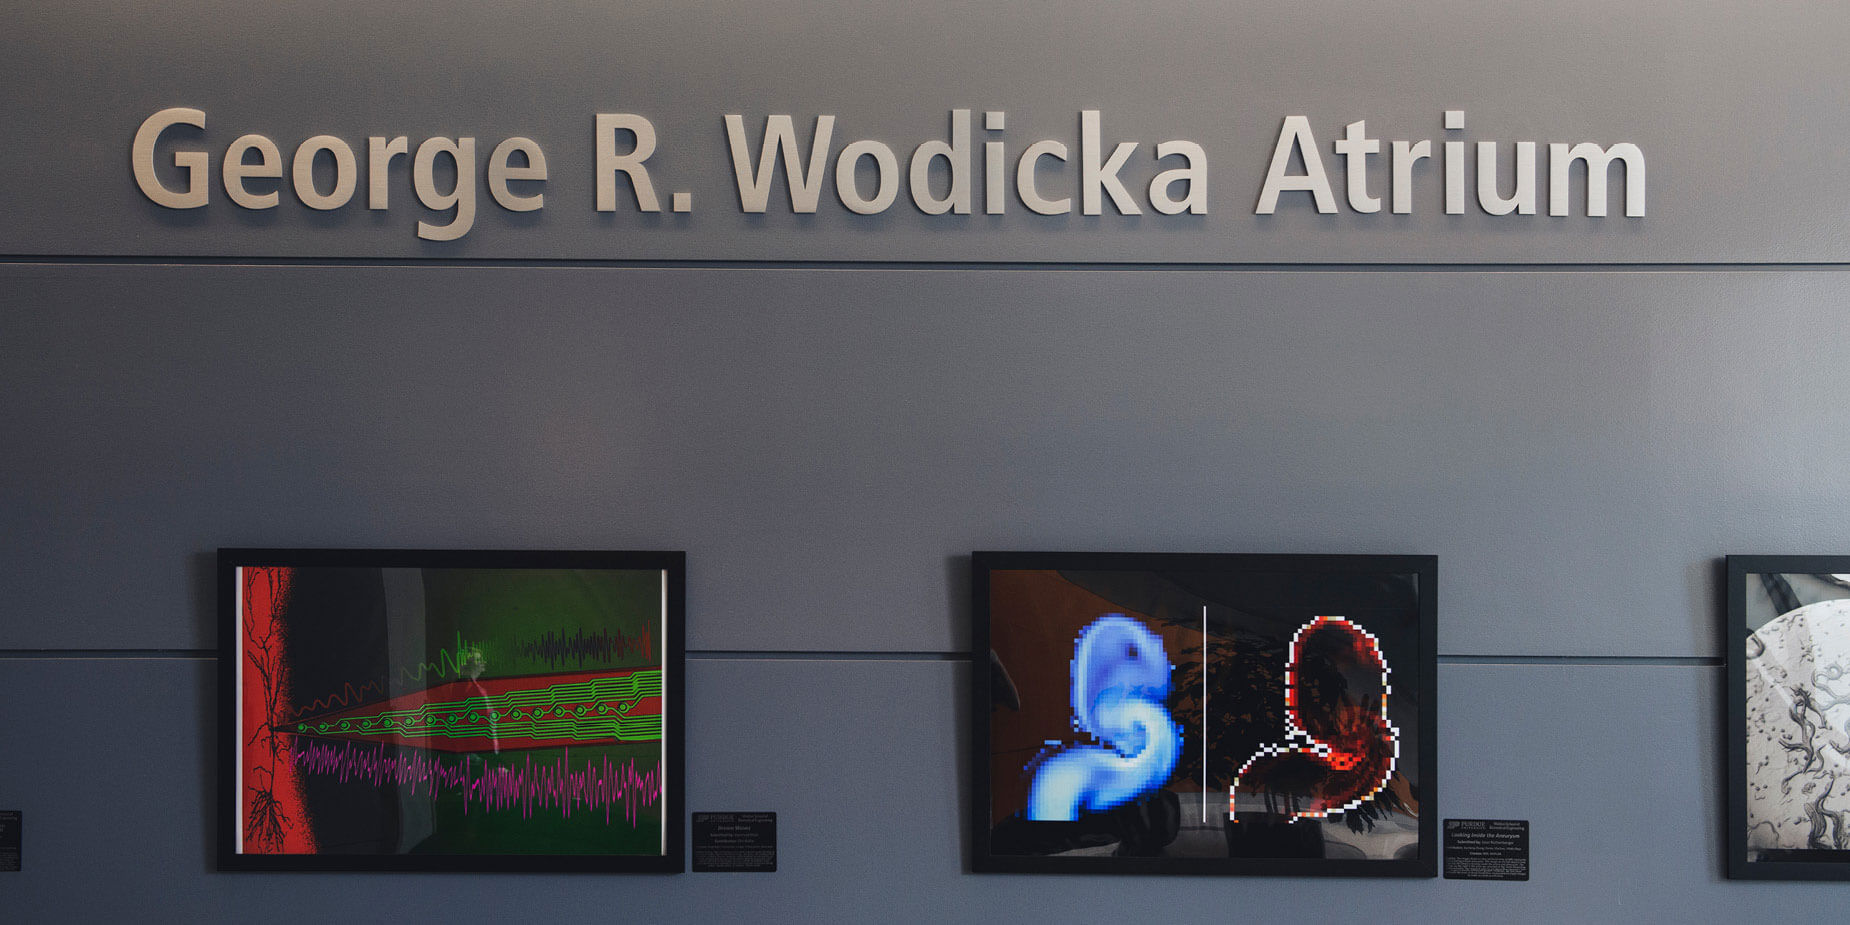 A sign on the first-floor wall in Martin C. Jischke Hall of Biomedical Engineering displays the atrium’s new title, the “George R. Wodicka Atrium.”